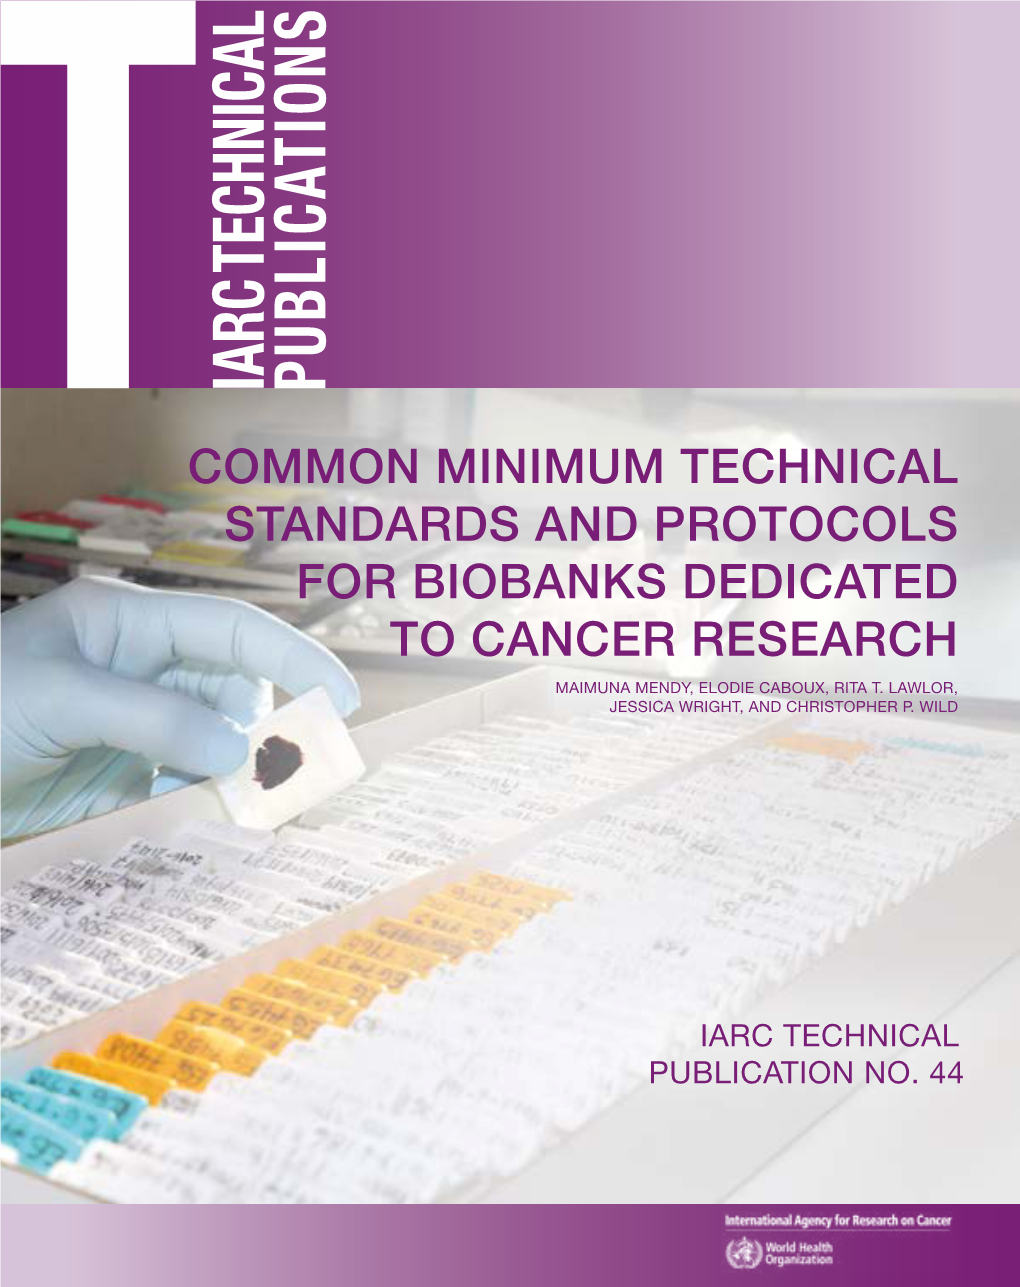 Common Minimum Technical Standards and Protocols for Biobanks Dedicated to Cancer Research